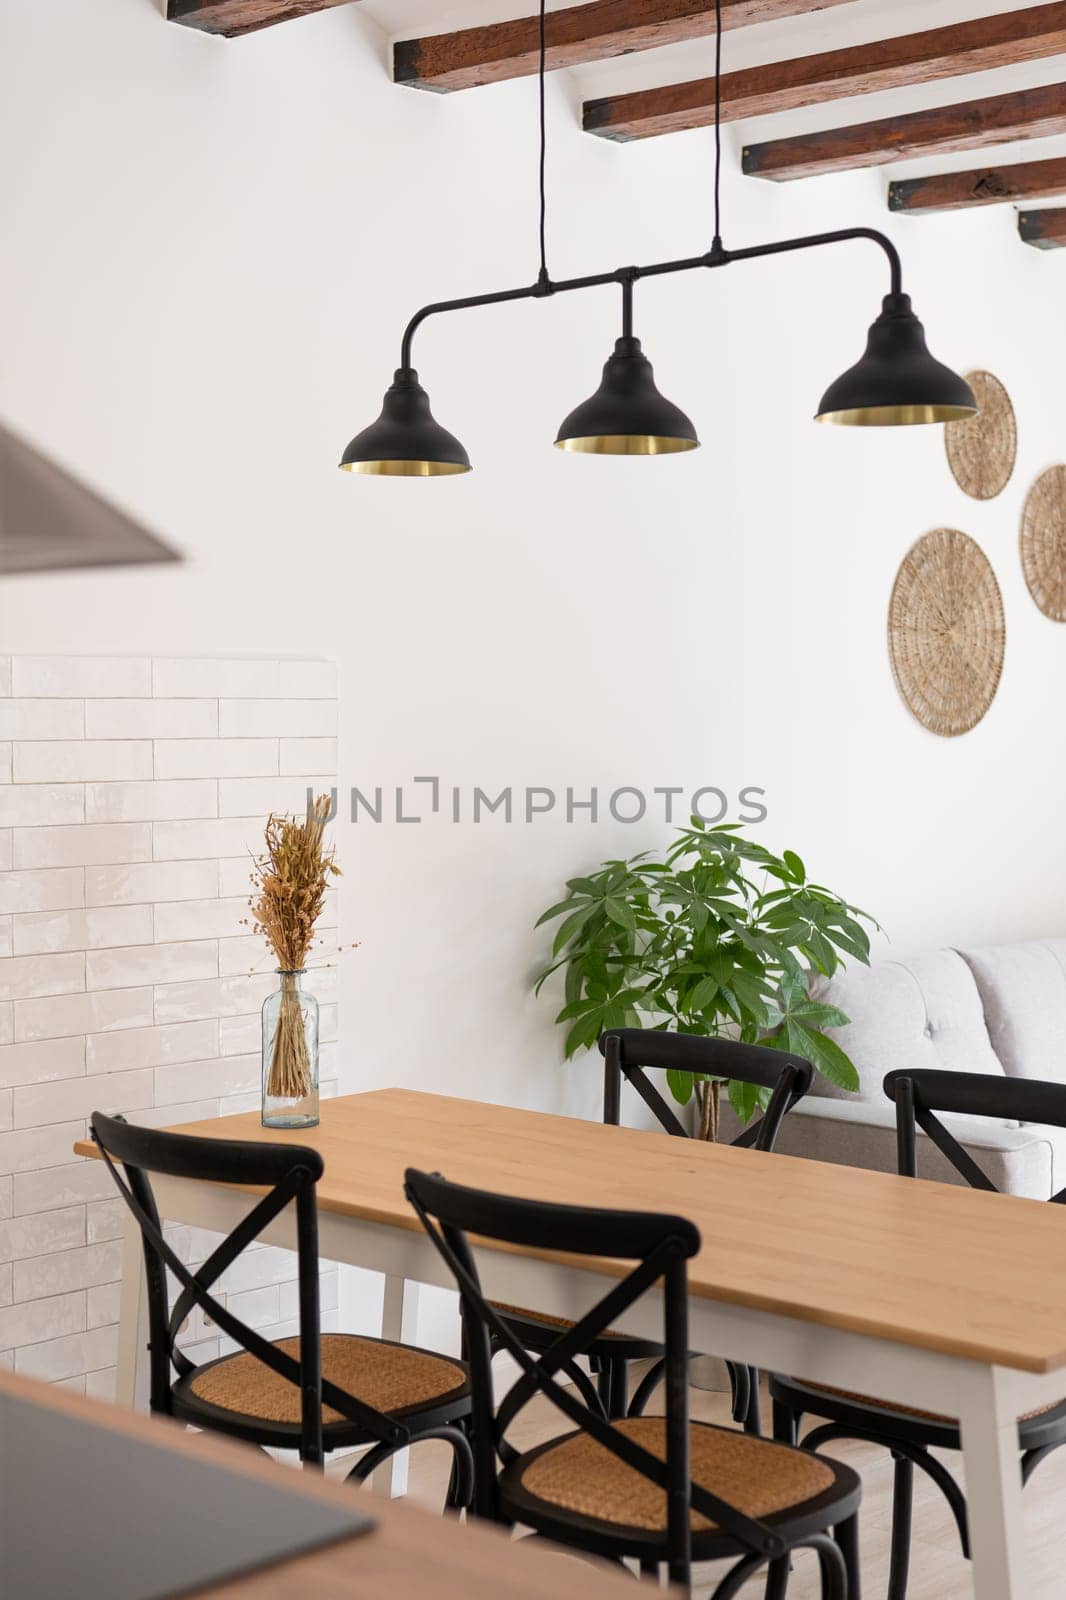 Chandelier over wooden dining table with chairs in studio by apavlin